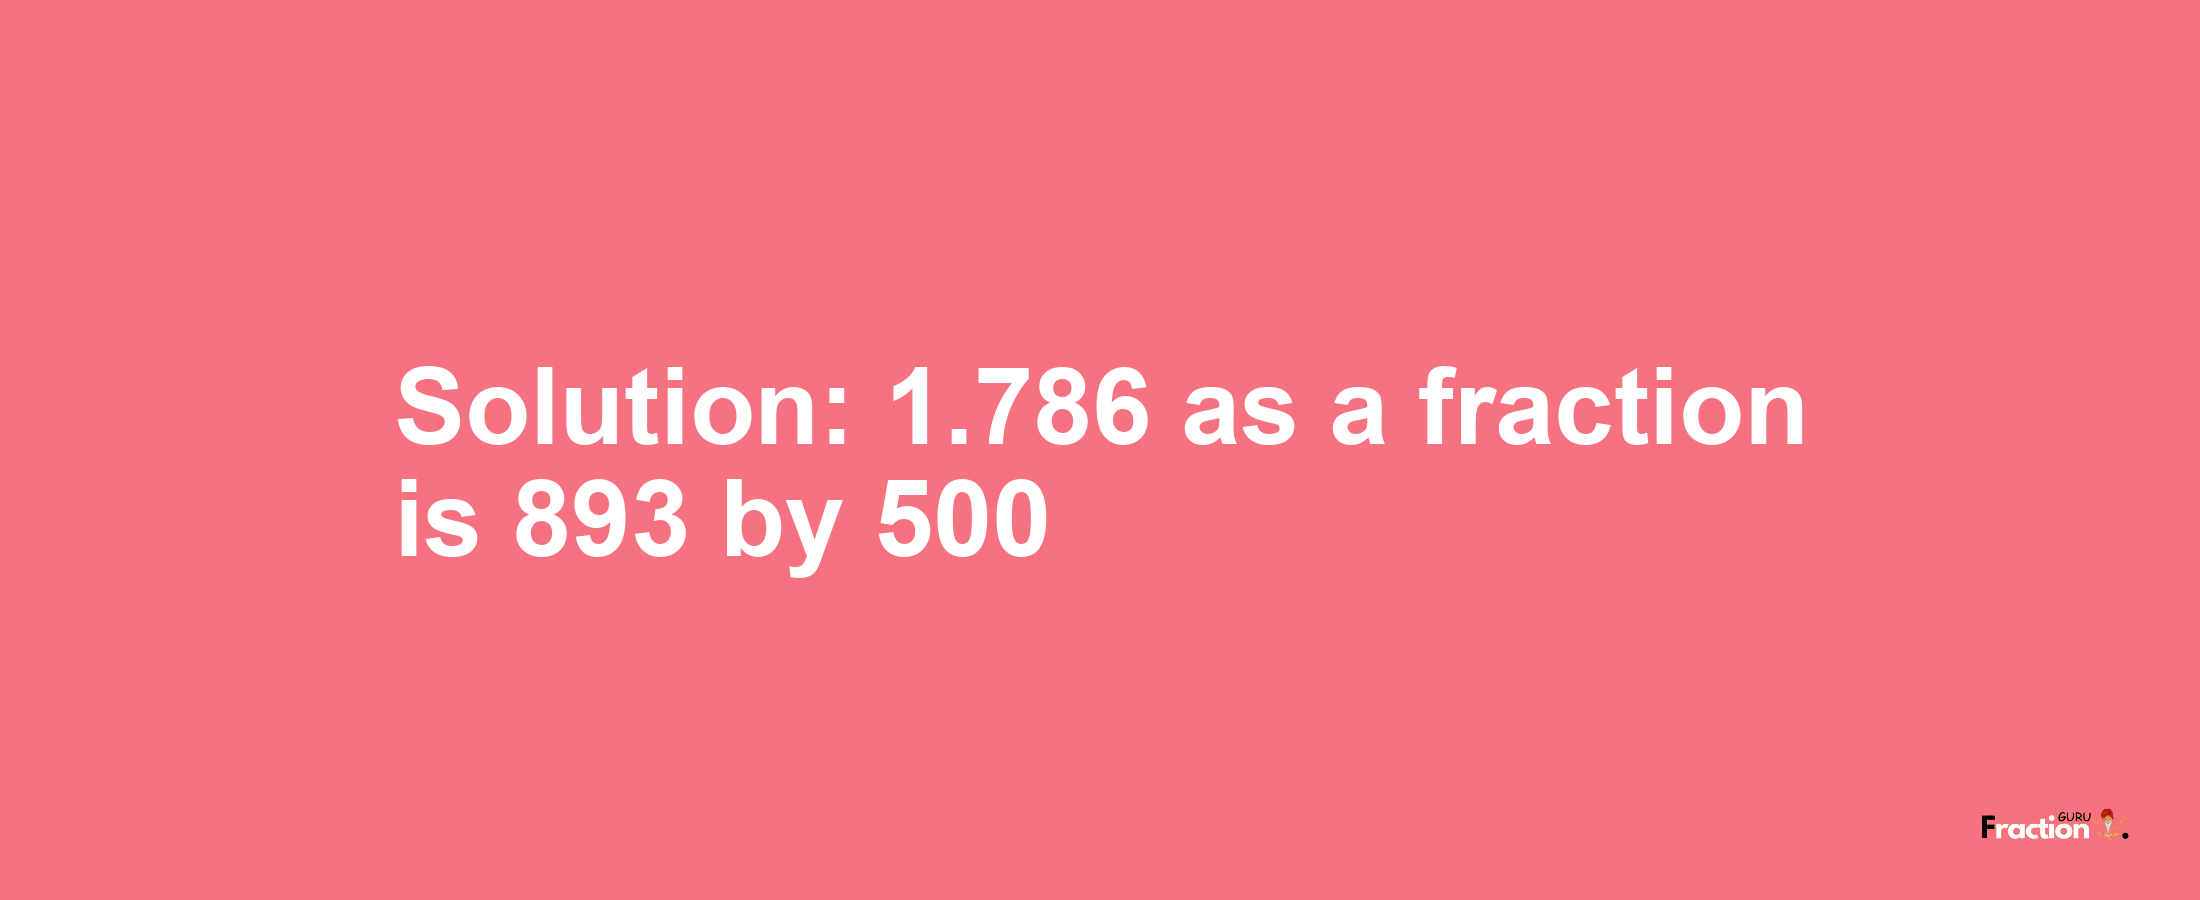 Solution:1.786 as a fraction is 893/500